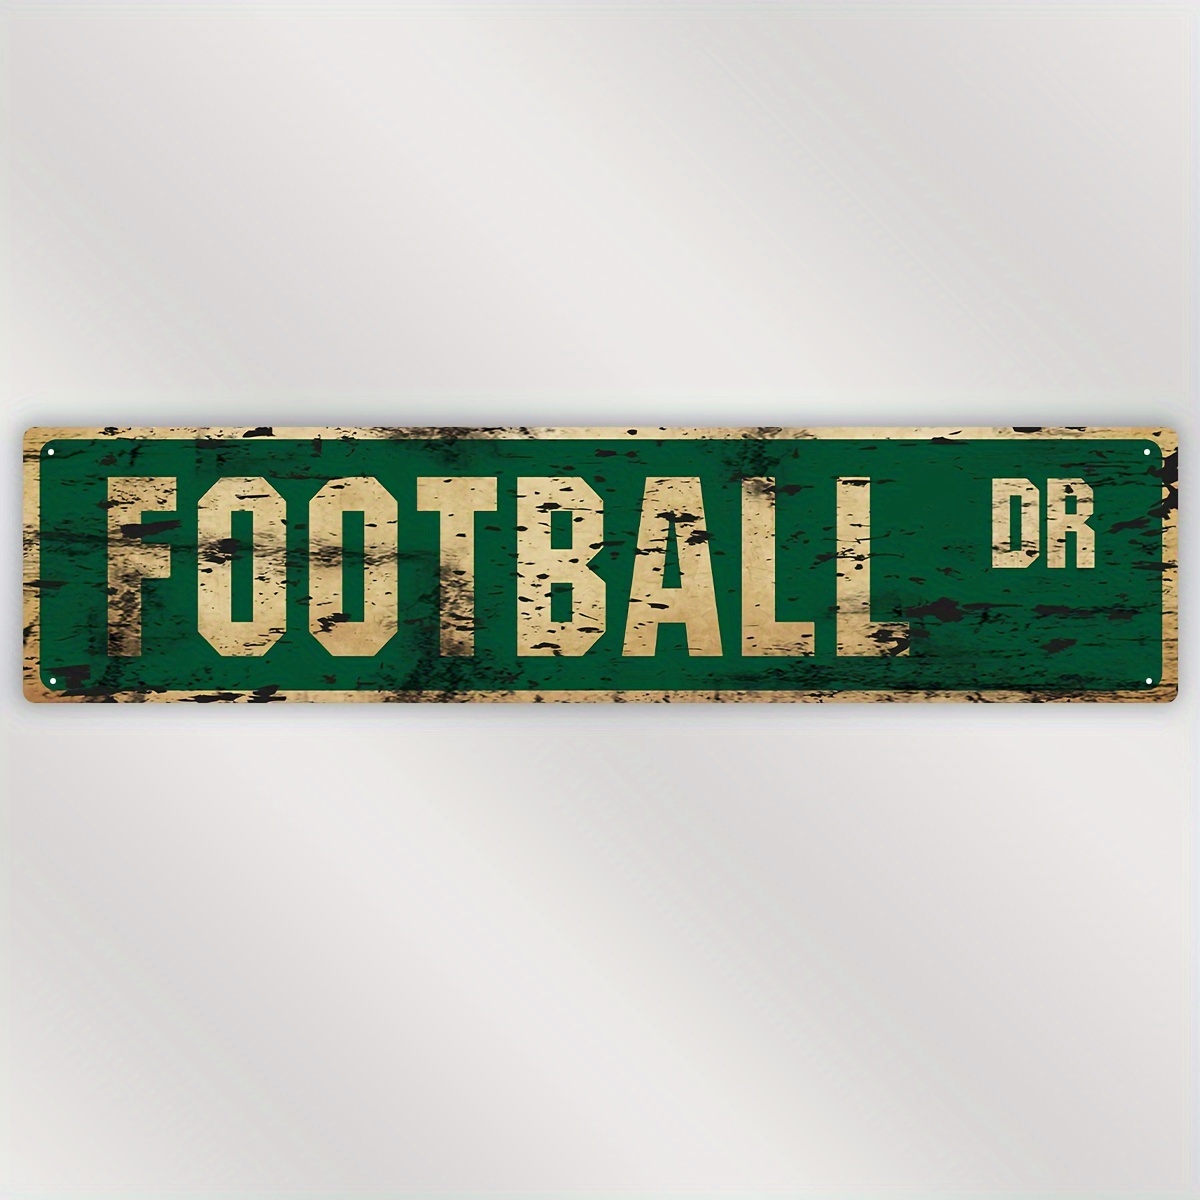 

Vintage Porch Rules Football Sign: 11.5" X 3.7" Metal Hanging Wall Art - Waterproof, Dustproof, Perfect For Home, Restaurant, Bar, Cafe, Garage Decor